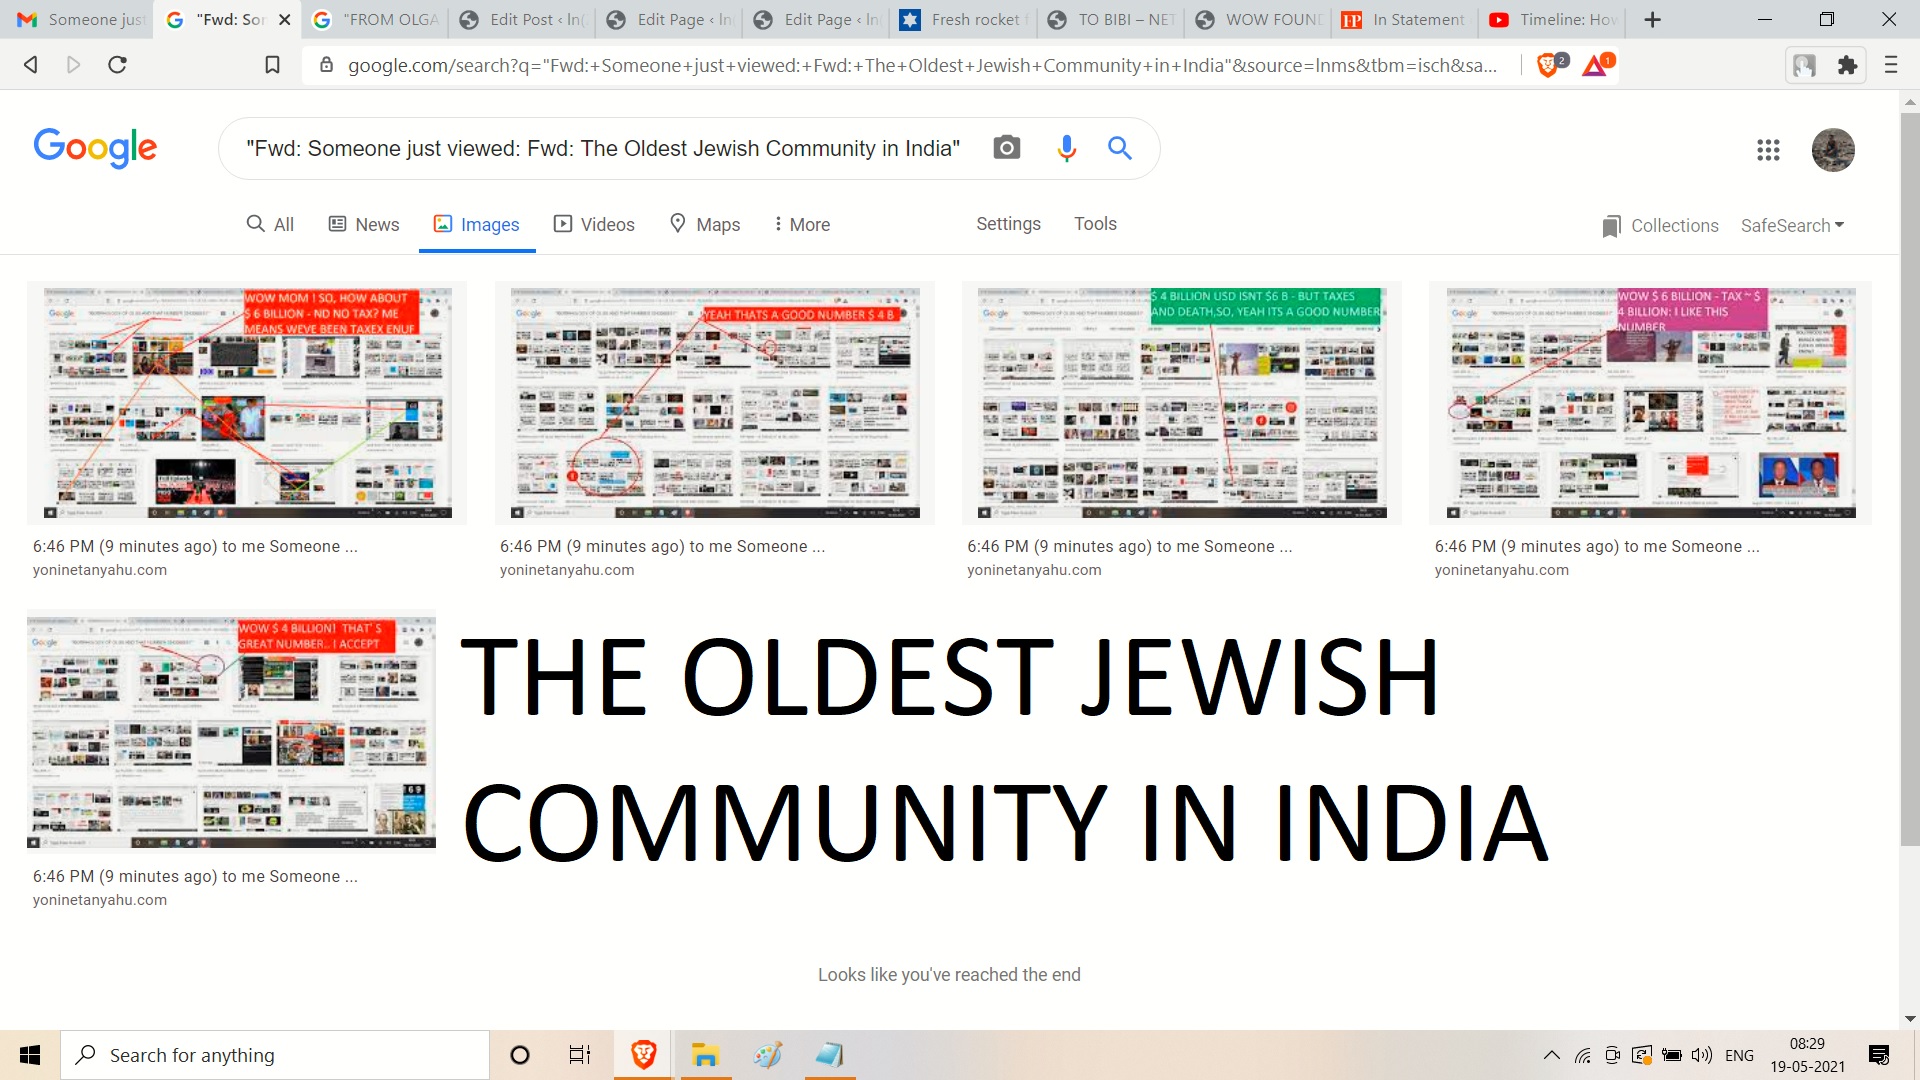 THE OLDEST JEWISH COMMUNITY IN INDIA